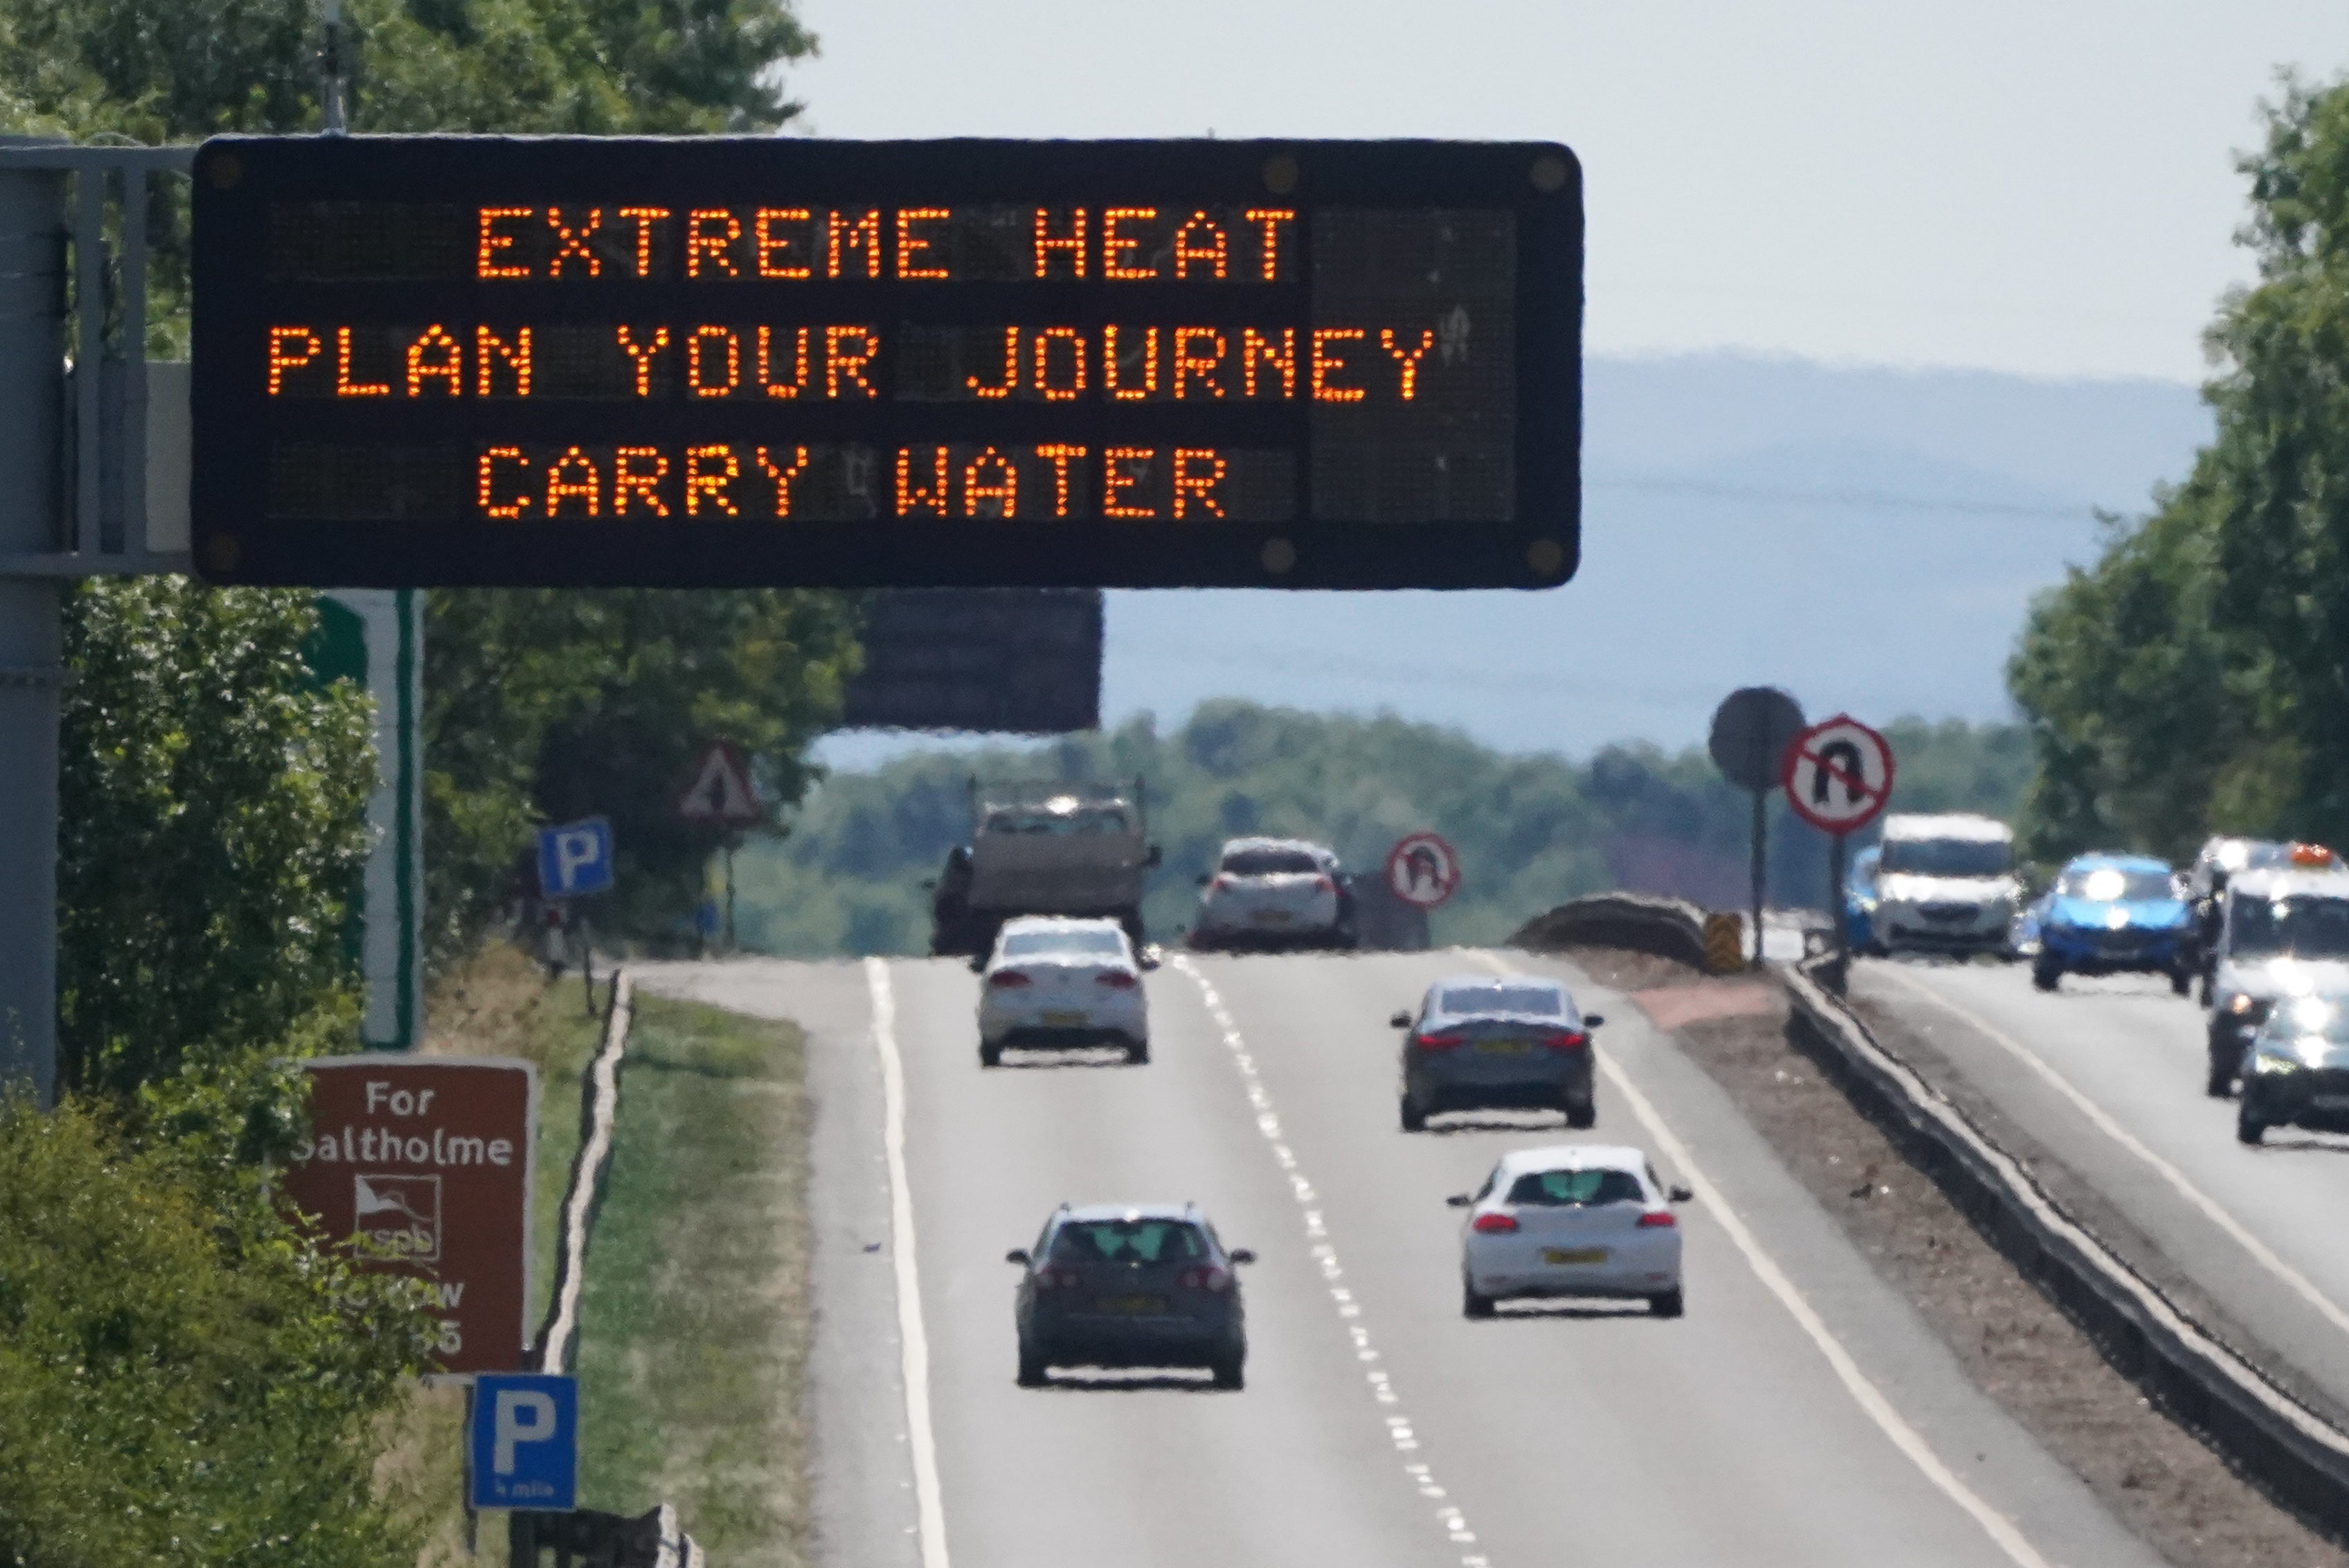 A sign over the A19 road towards Teesside warns over extreme weather as the UK braces for the upcoming heatwave (Owen Humphreys/PA)